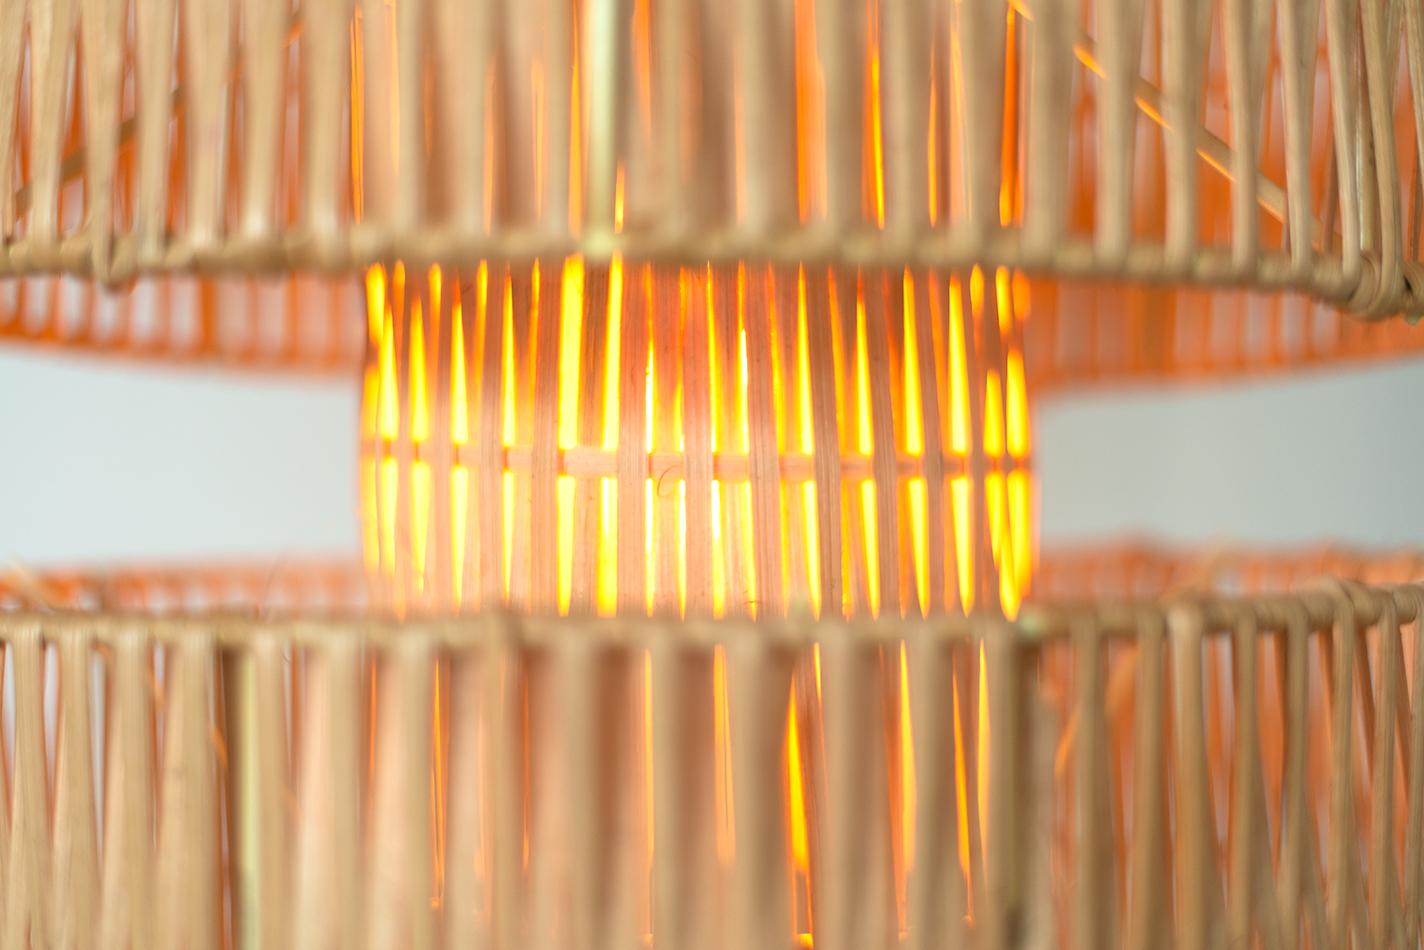 This handwoven rattan Emilio light screen is a unique creation by León León design from Mexico City.
The screen features a solid powder-coated steel structure and a handwoven Rattan fiber weaving.

Handcrafted in small batches, every Lamp comes